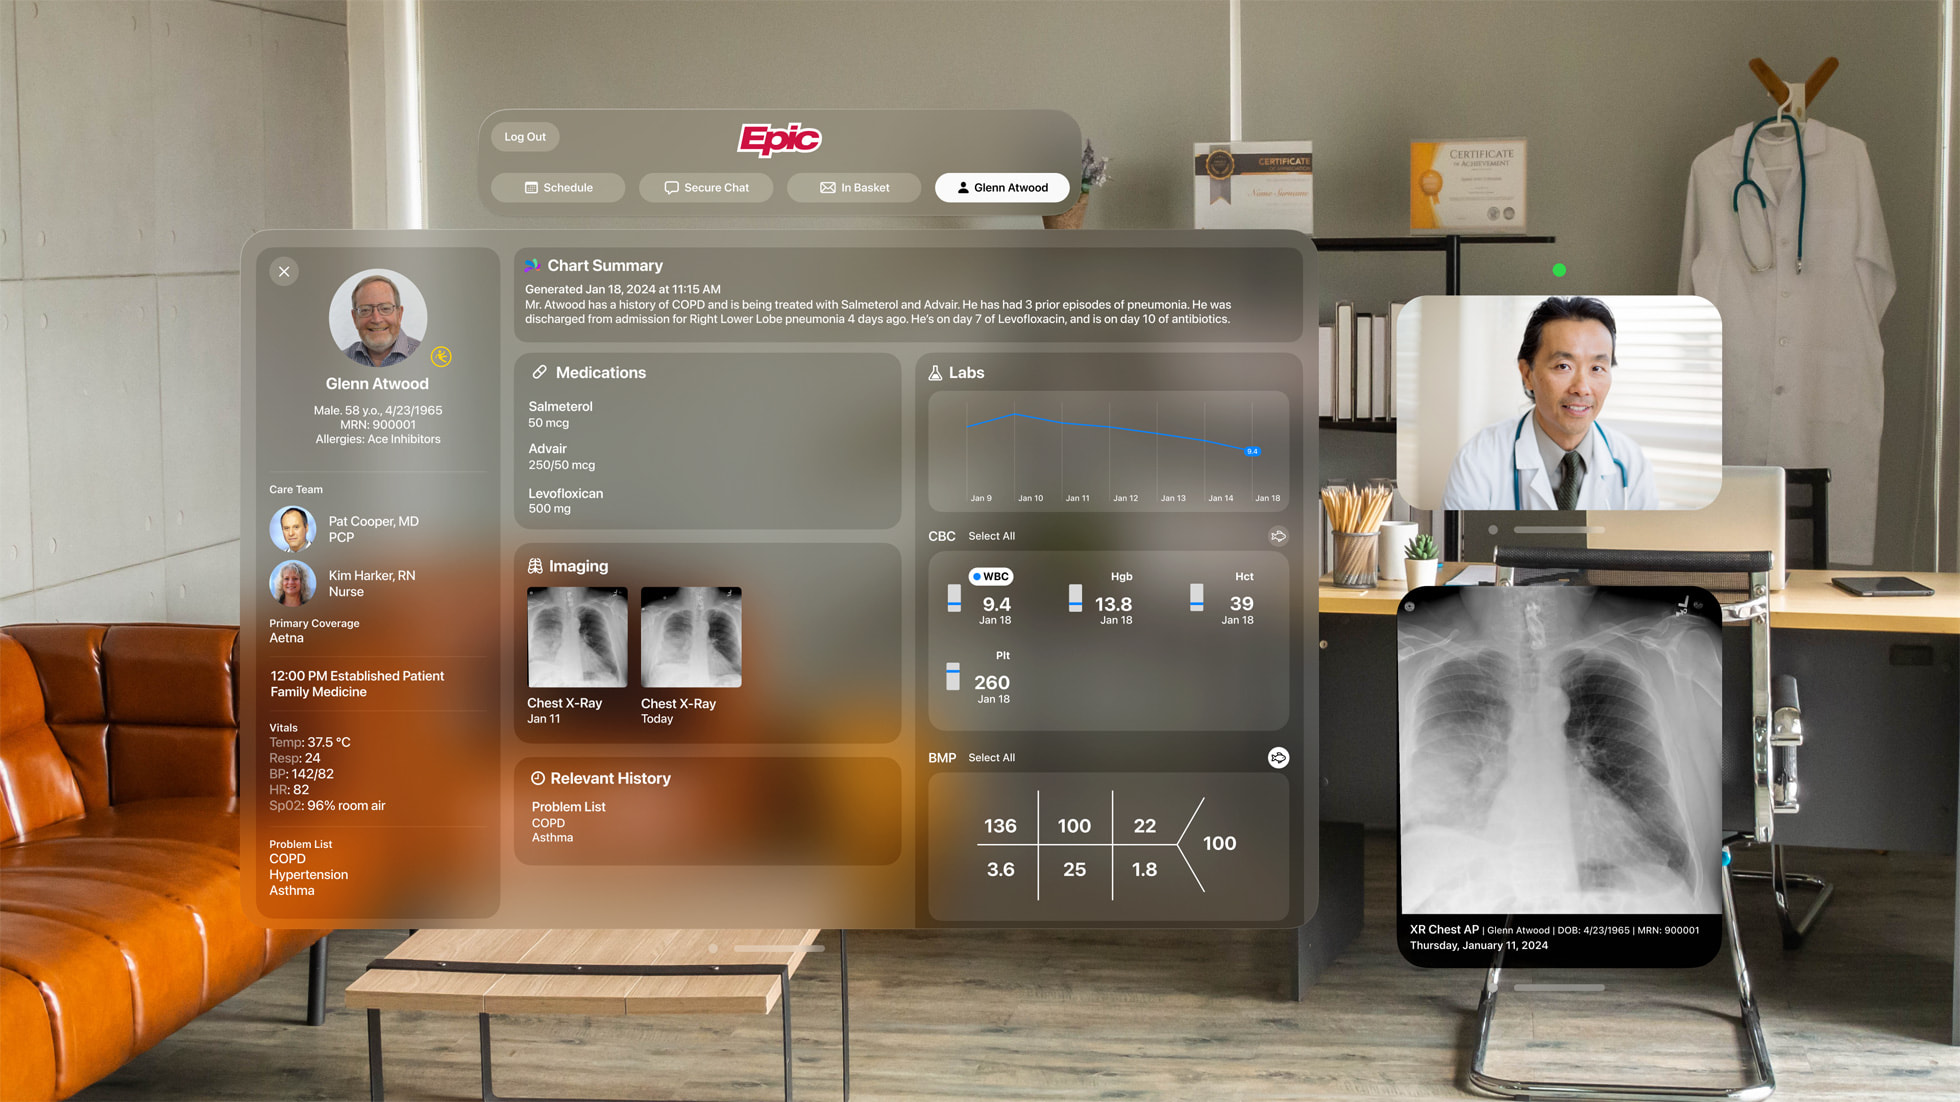 Epic Spatial Computing Concept allows physicians to experience charting, secure chat, and In Basket workflows with Apple Vision Pro using gestures, opening up new collaboration and productivity workflows in a spatial environment for future applications. https://www.apple.com/